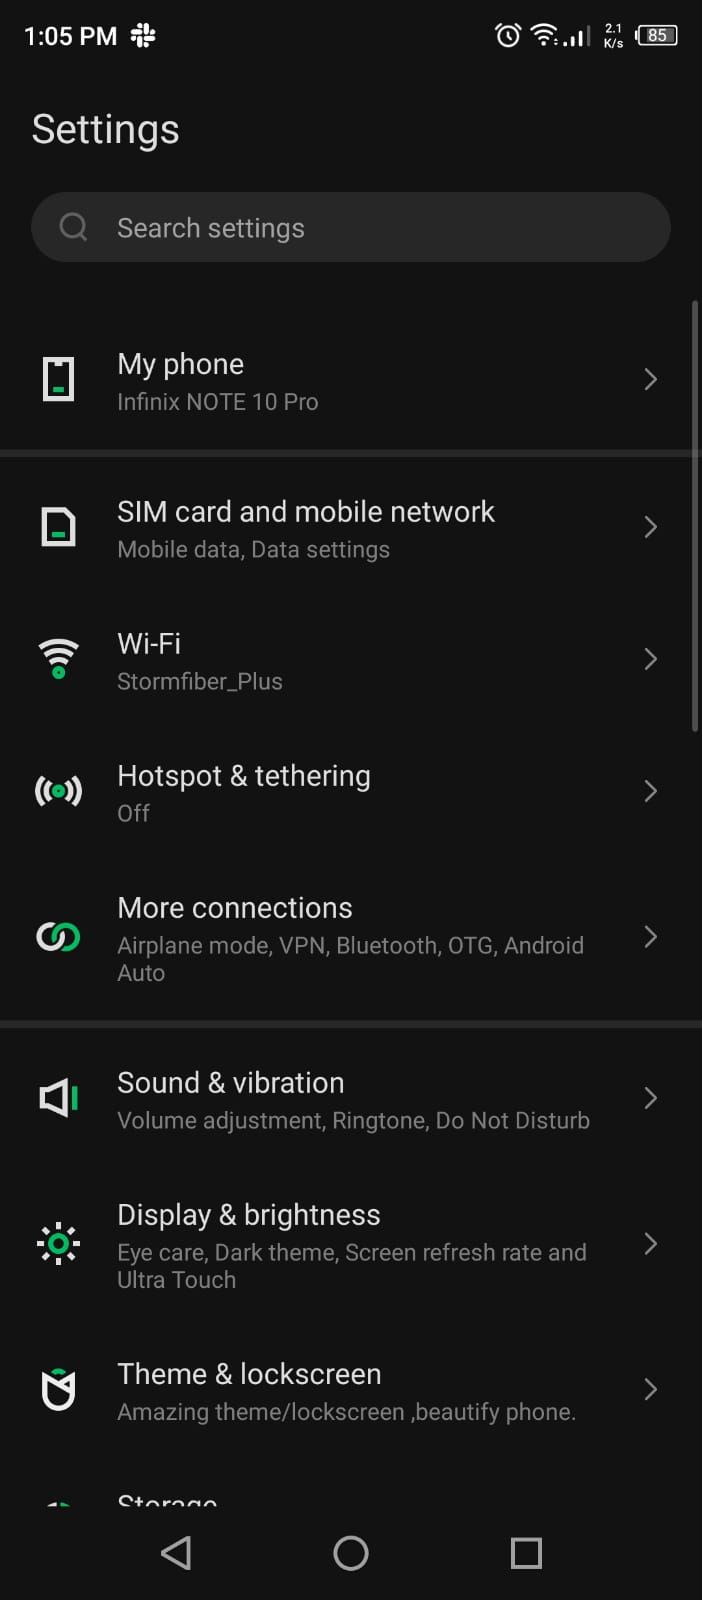 More connections option in Android Settings